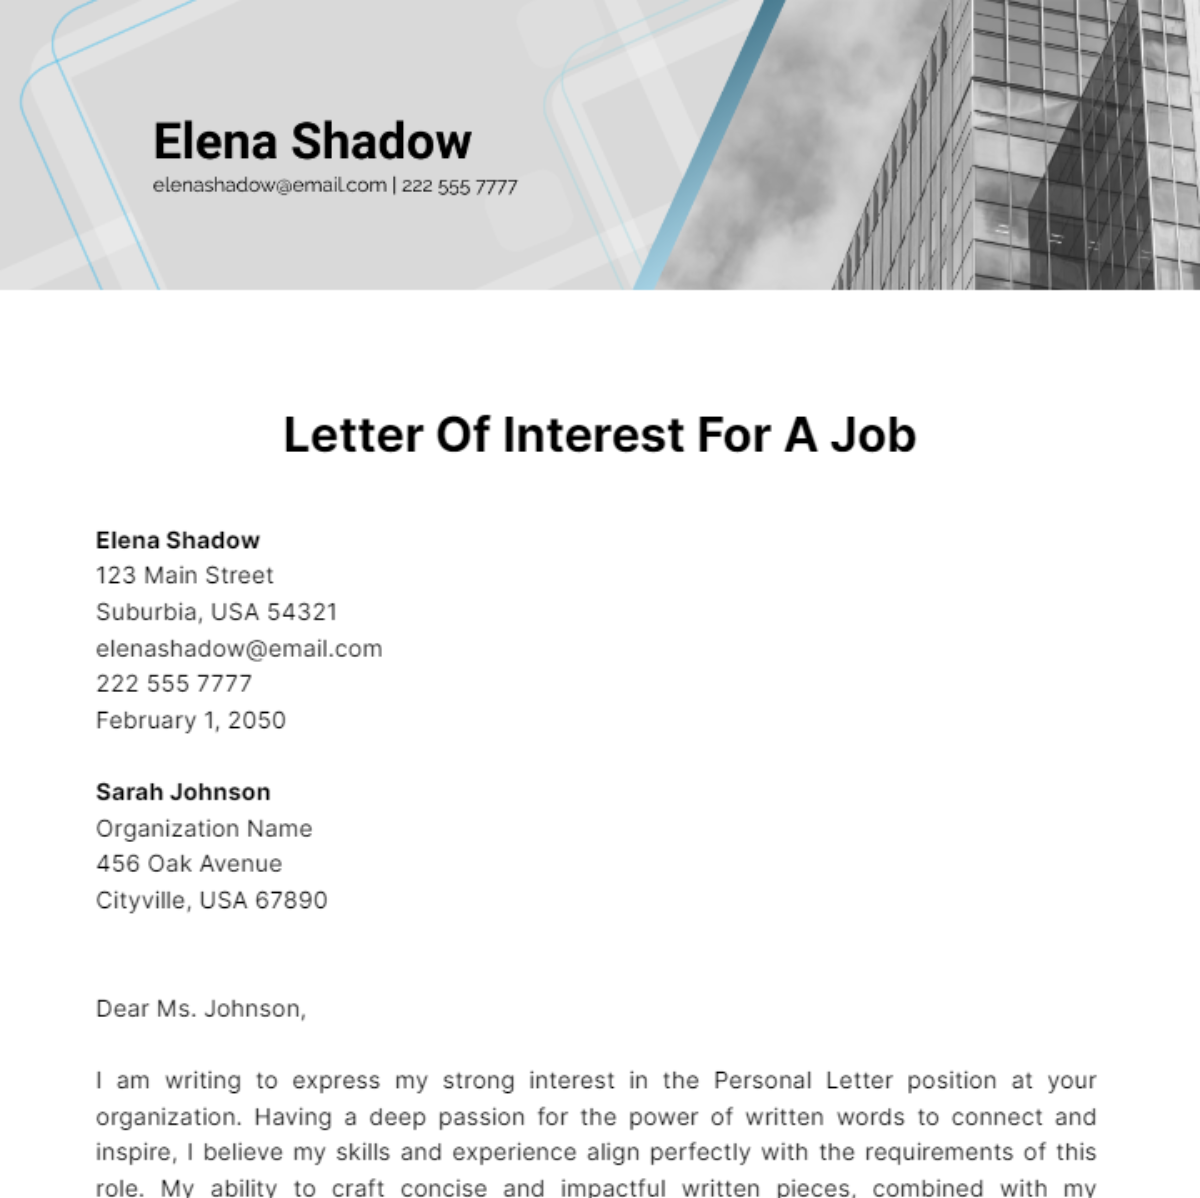 Letter Of Interest For A Job Template